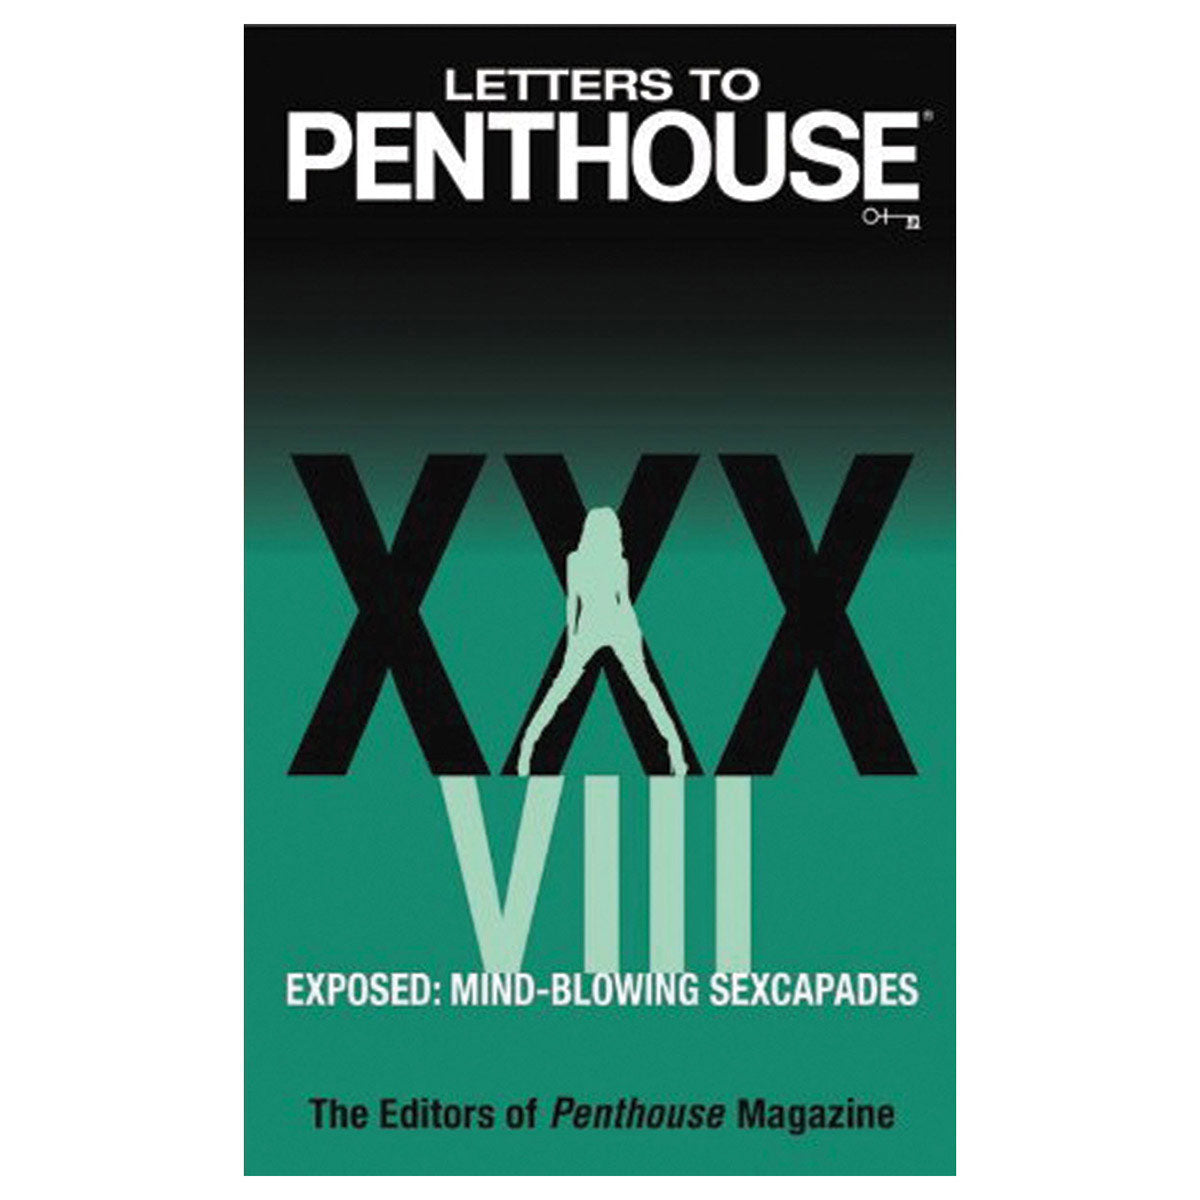 Letters to Penthouse XXXVIII - Exposed: Mind-blowing Sexcapades - Grand Central Publishing